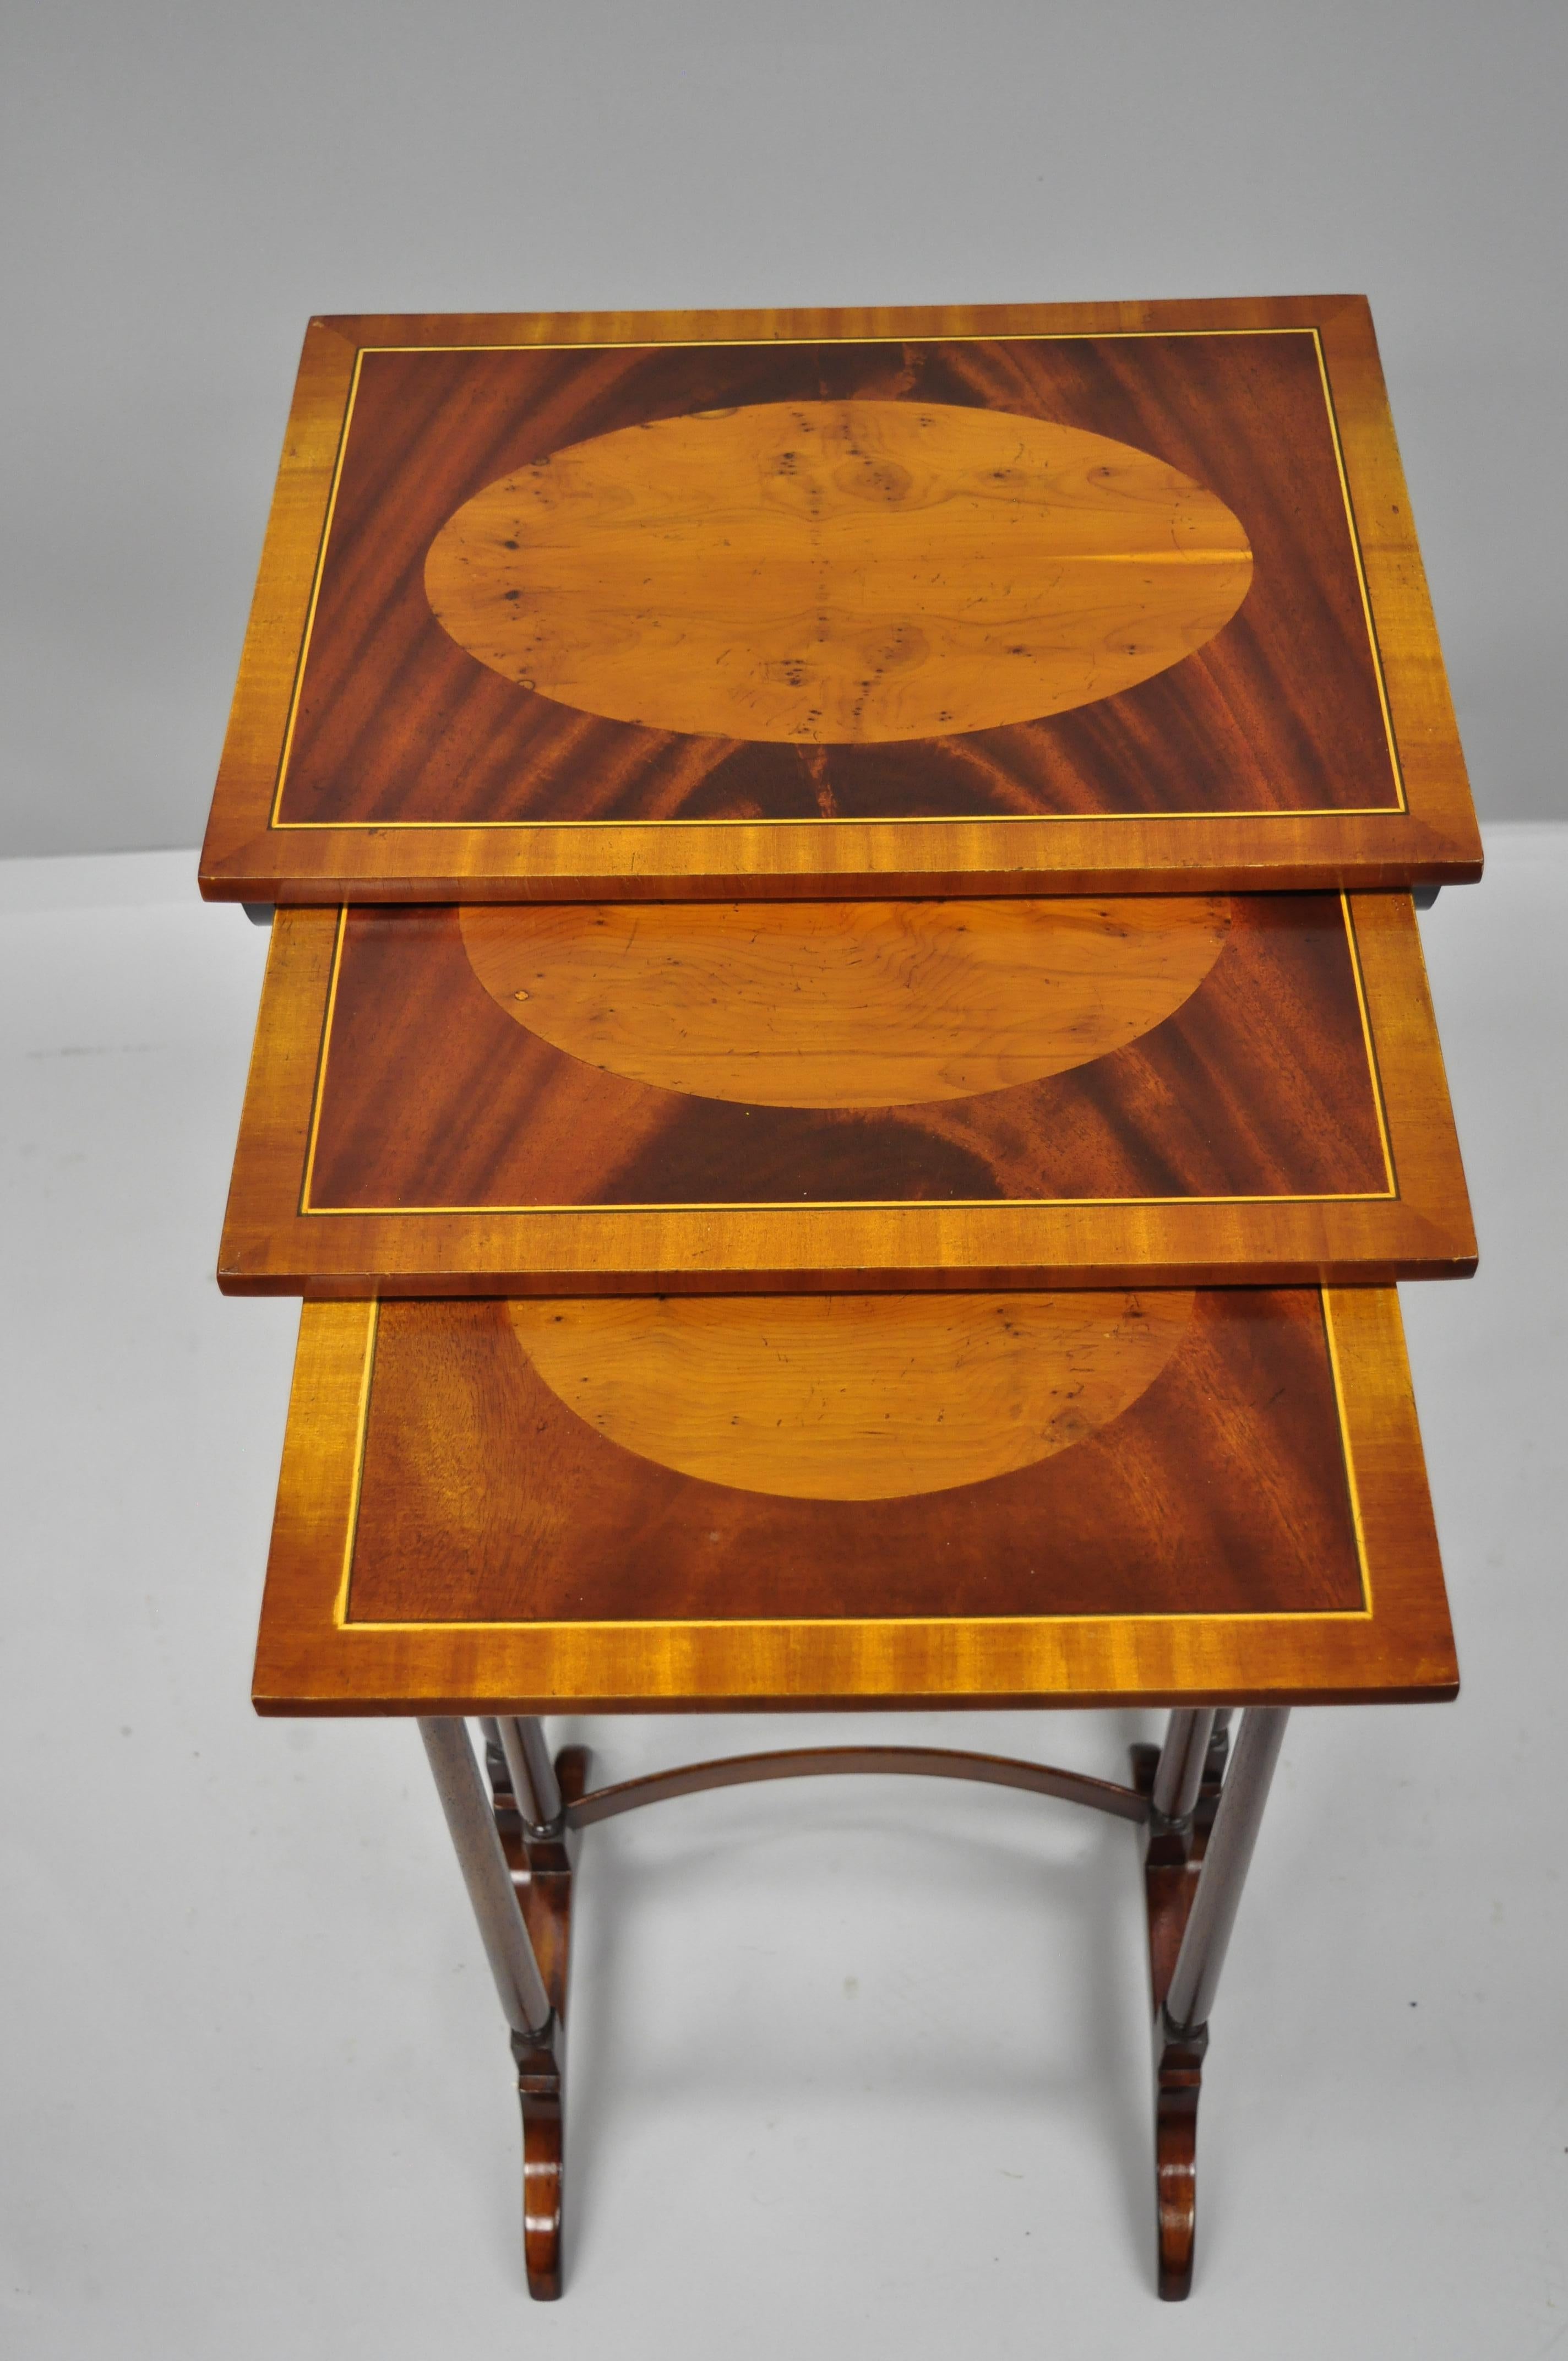 3-tier inlaid nesting side tables in yew wood and mahogany. Listing features pencil inlaid tops, beautiful yew wood and mahogany grain, bowed stretcher, 3 graduating sizes great style and form, circa mid-late 20th century. Measurements: 

27.5